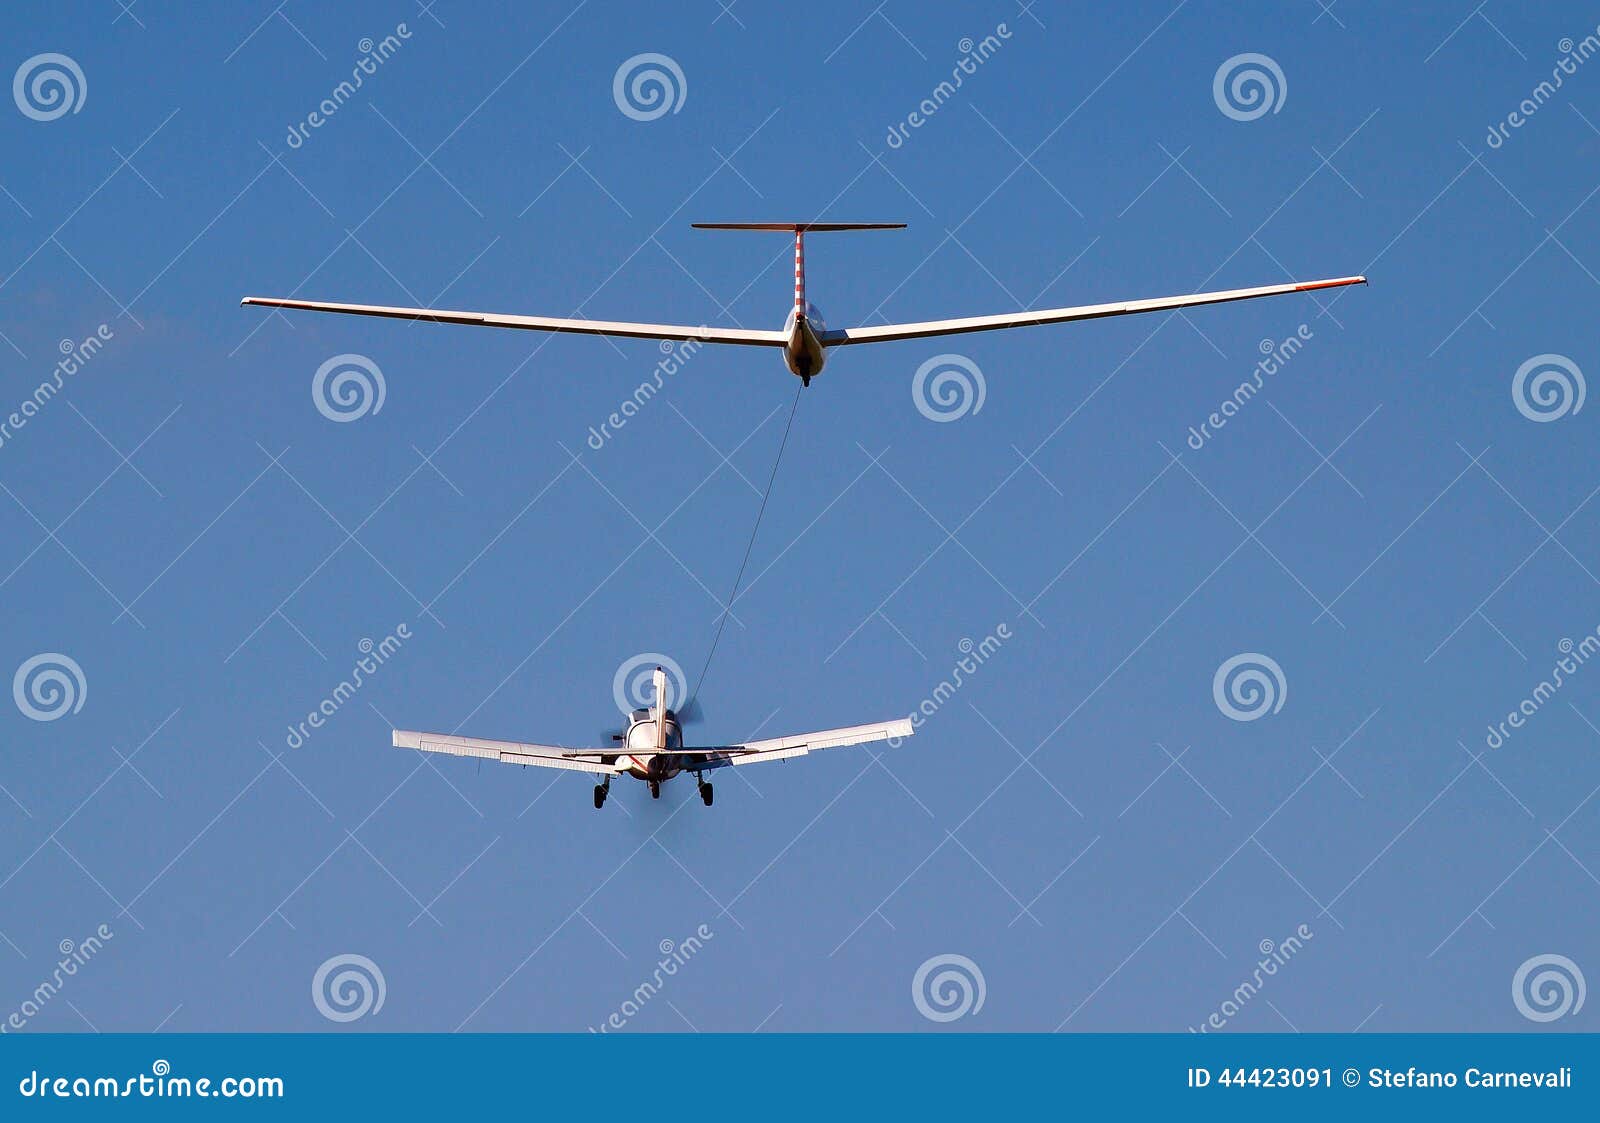 airplane towing a glider